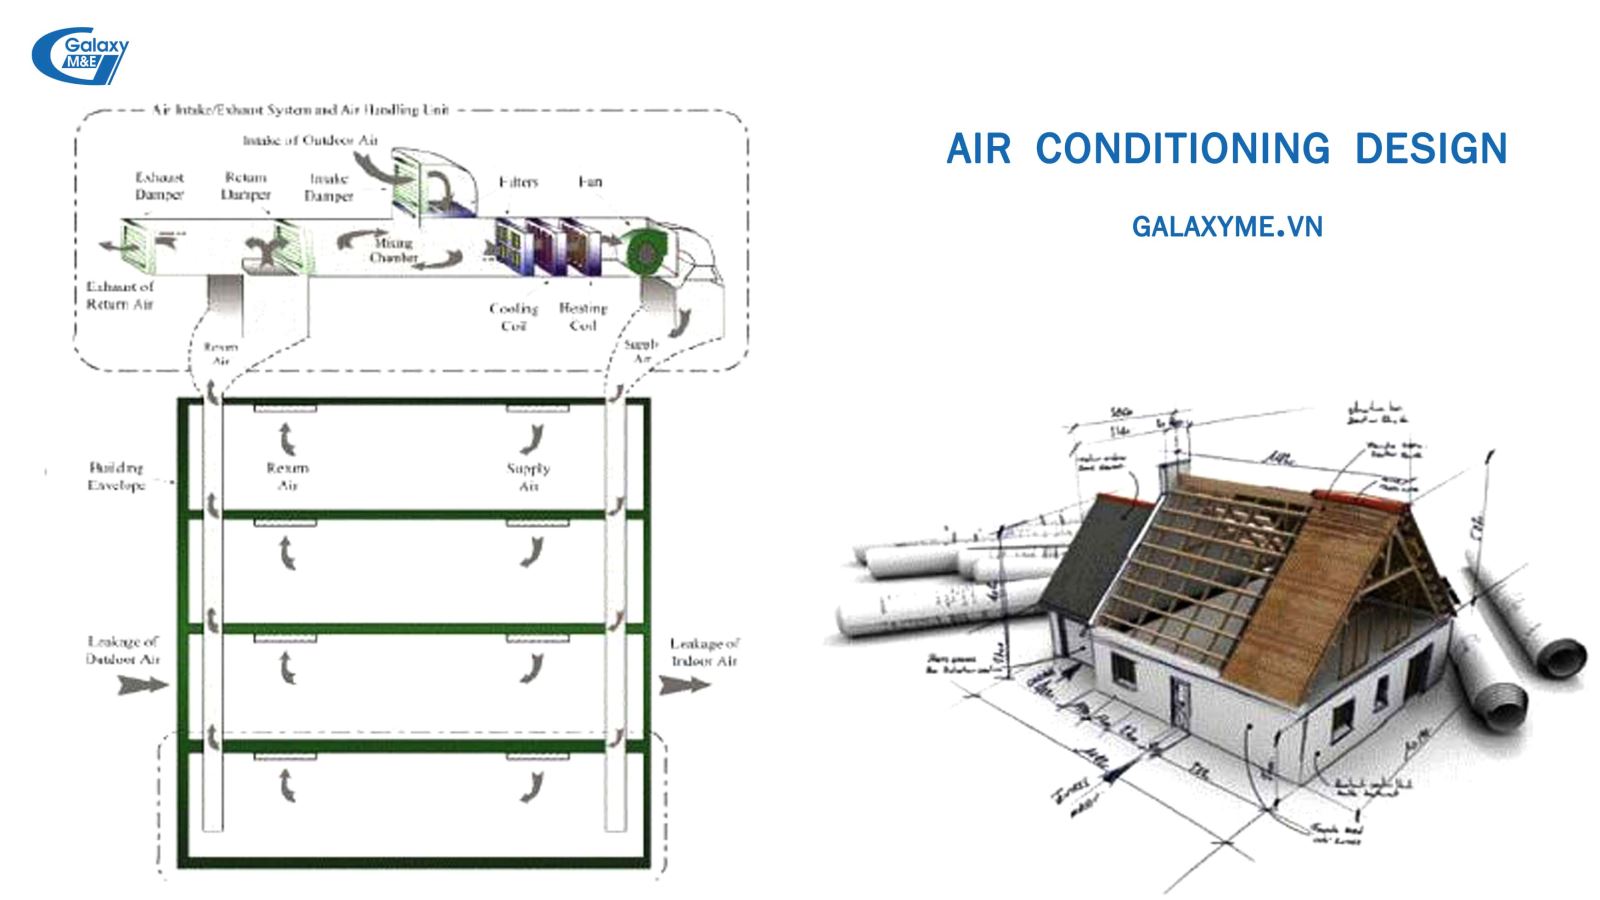 Overall simulation of the air conditioning systems.